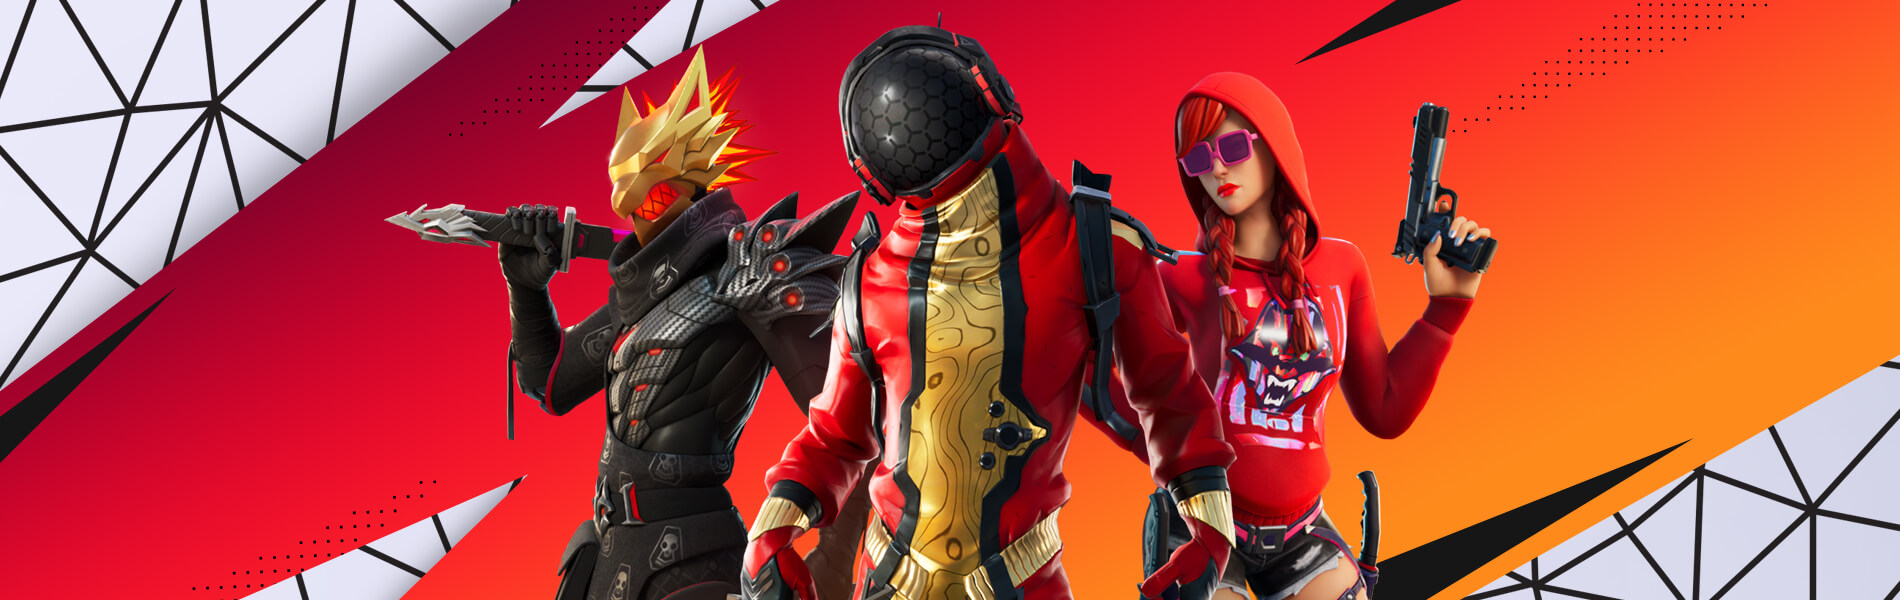 Fortnite Zero Build Arena available now for a limited time